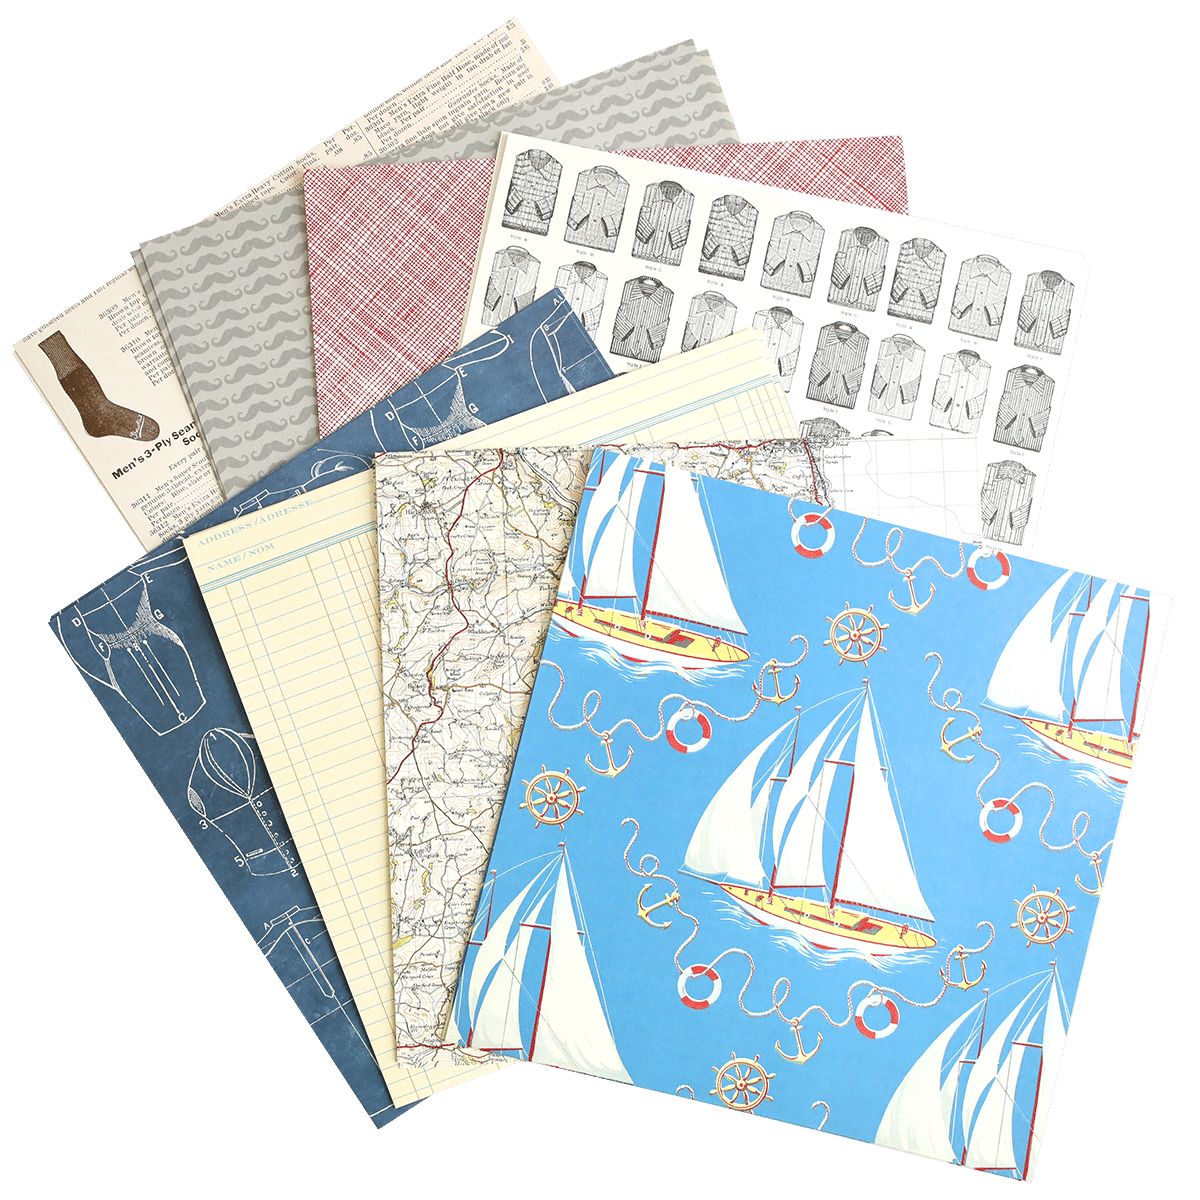 A bunch of Masculine 12x12 Cardstock papers with sailboats on them.